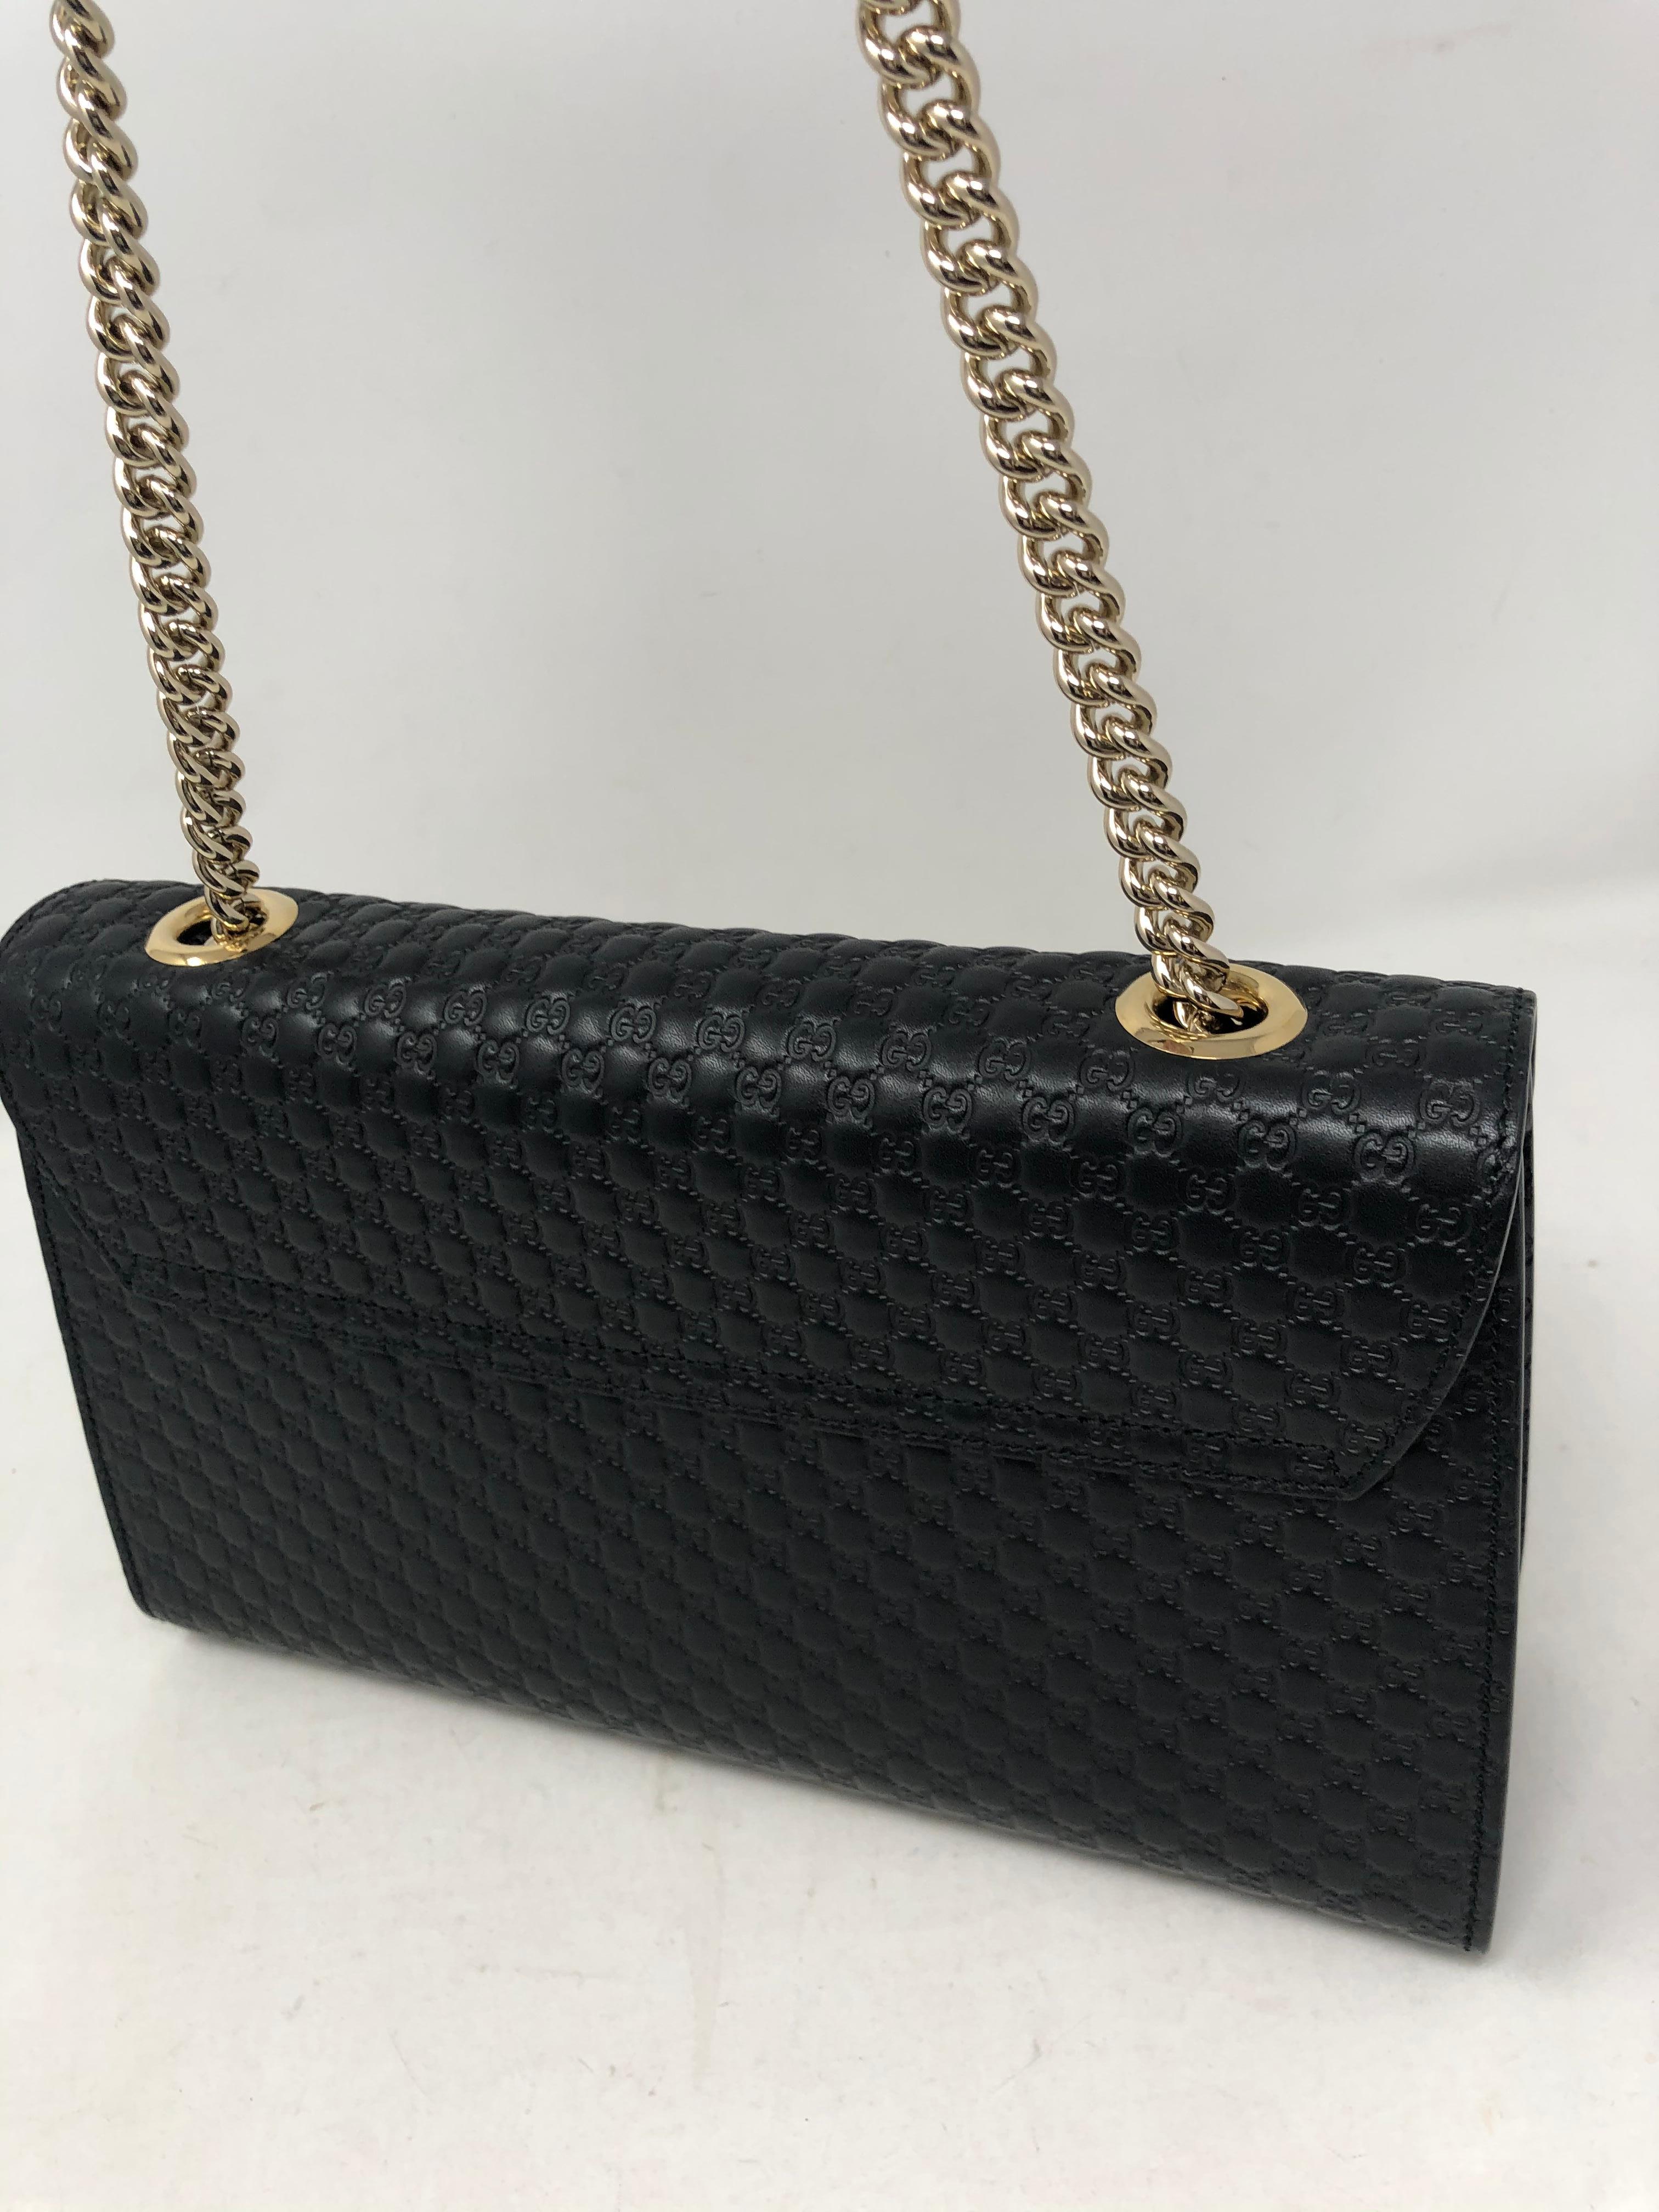 Women's or Men's Gucci Embossed Black Leather Bag